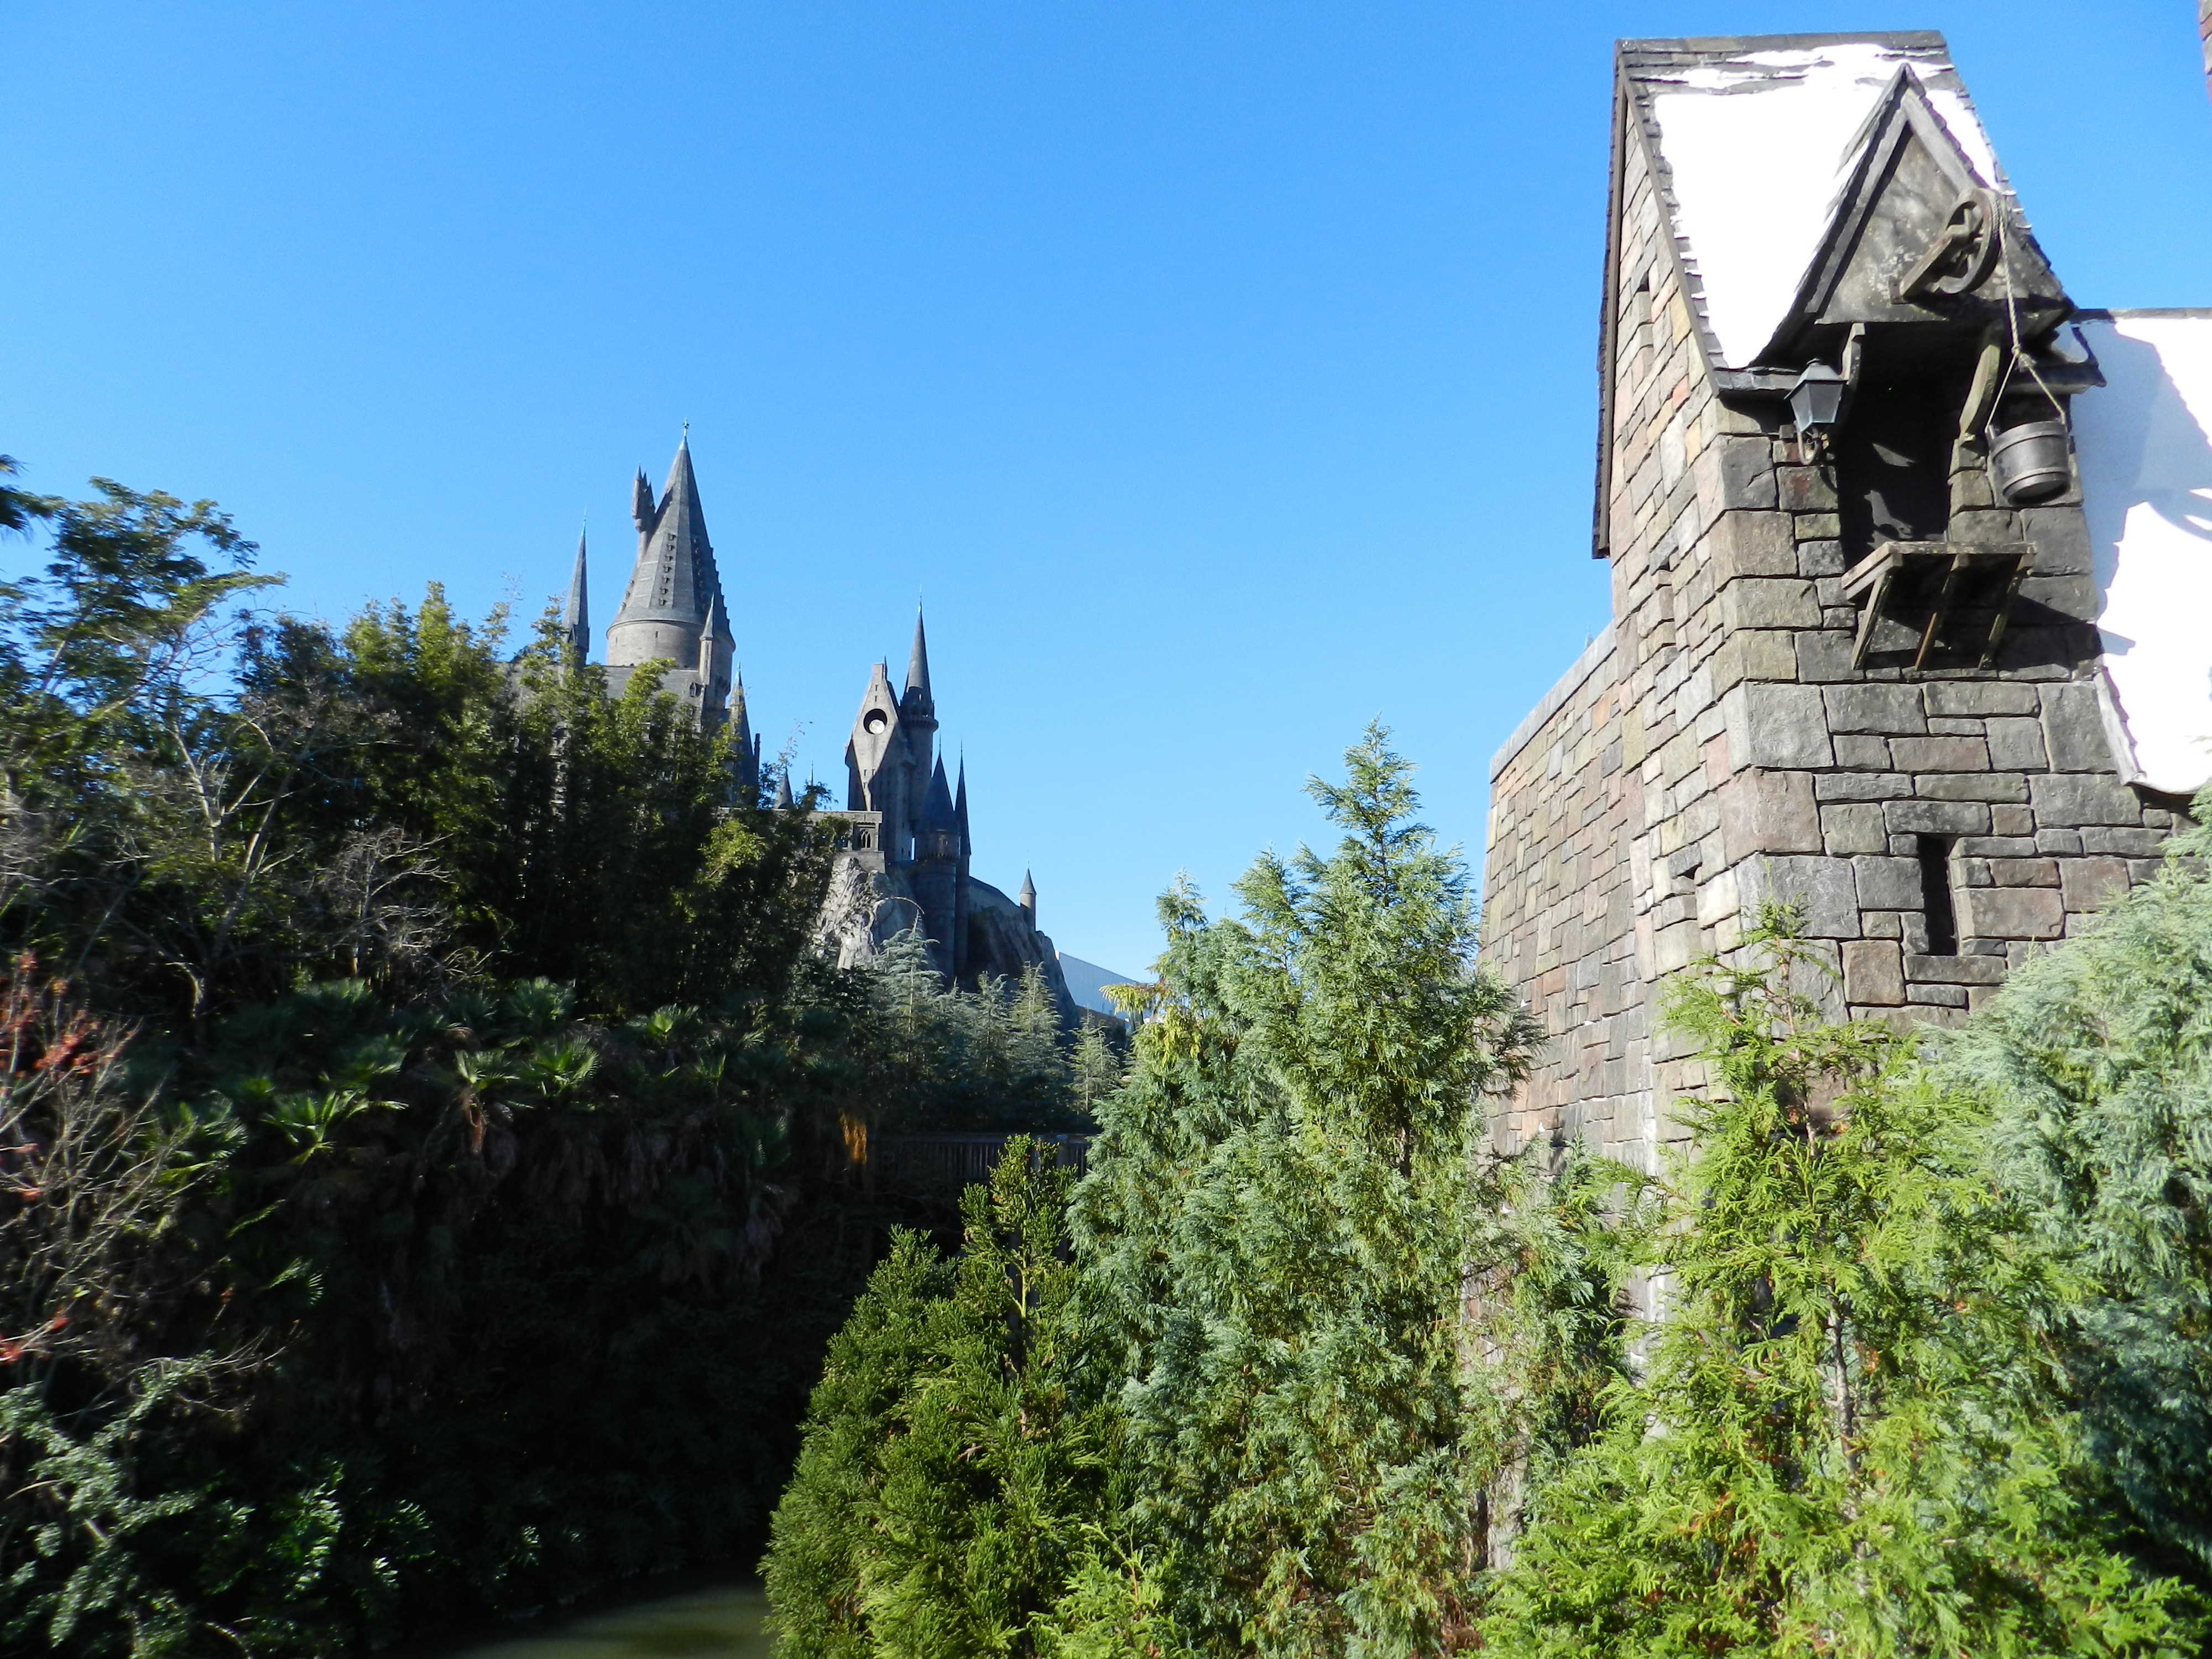 Wizarding World of Harry Potter Orlando view of Hogwarts Castle.